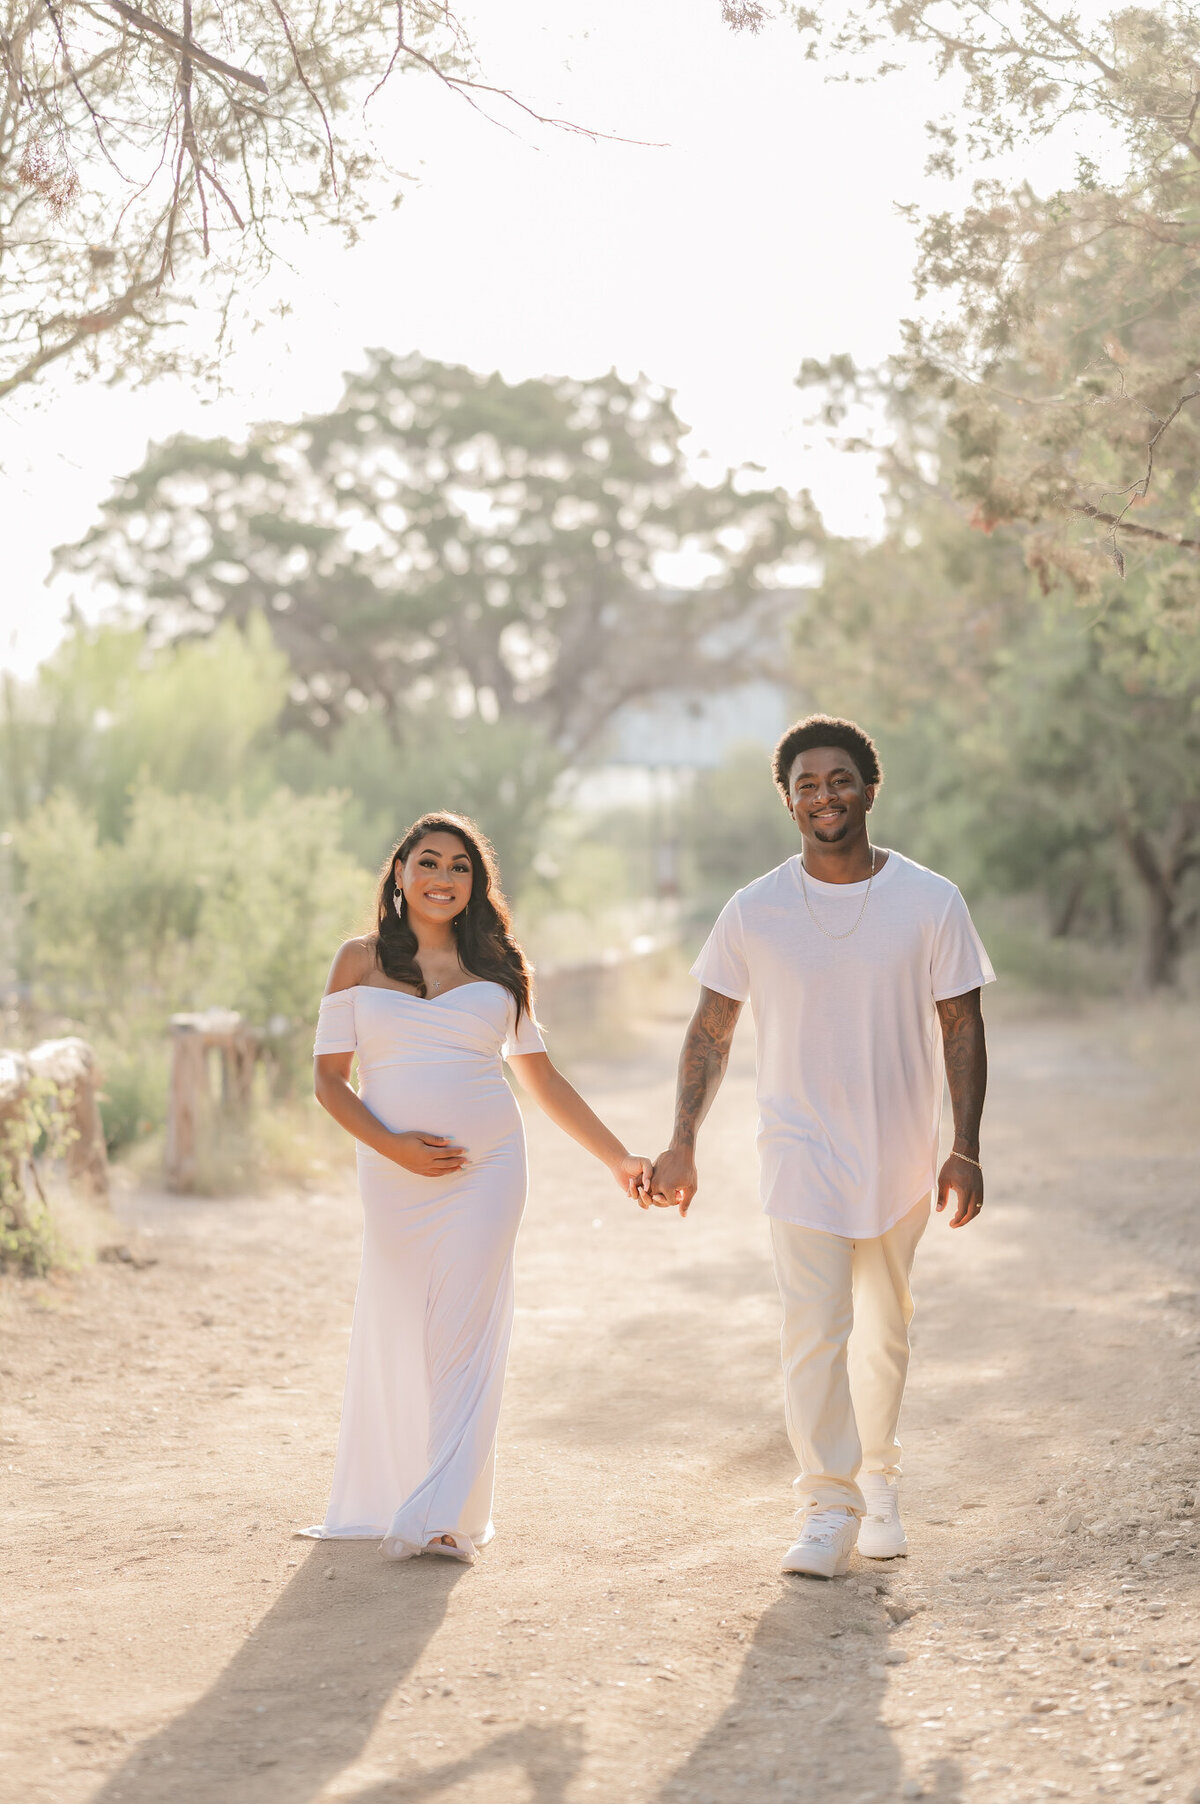 Young expecting couple in all white walks towards the camera holding hands.